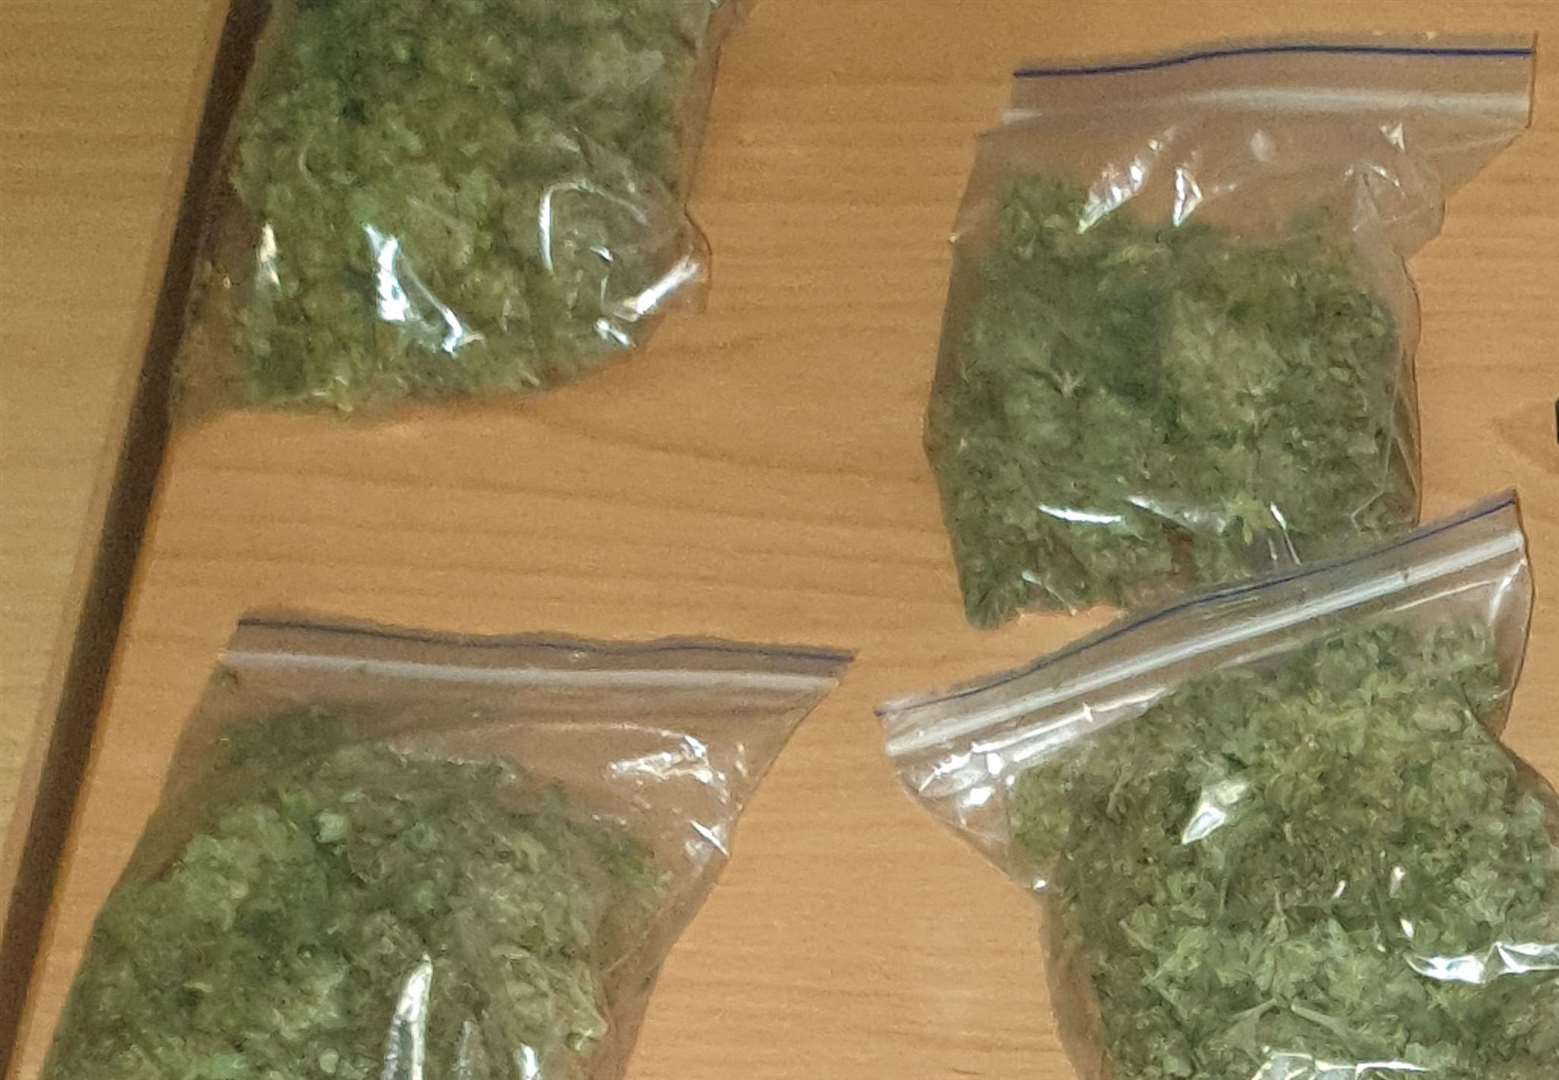 Several large bags of cannabis were found in the car in Sheerness. Picture: Kent Police